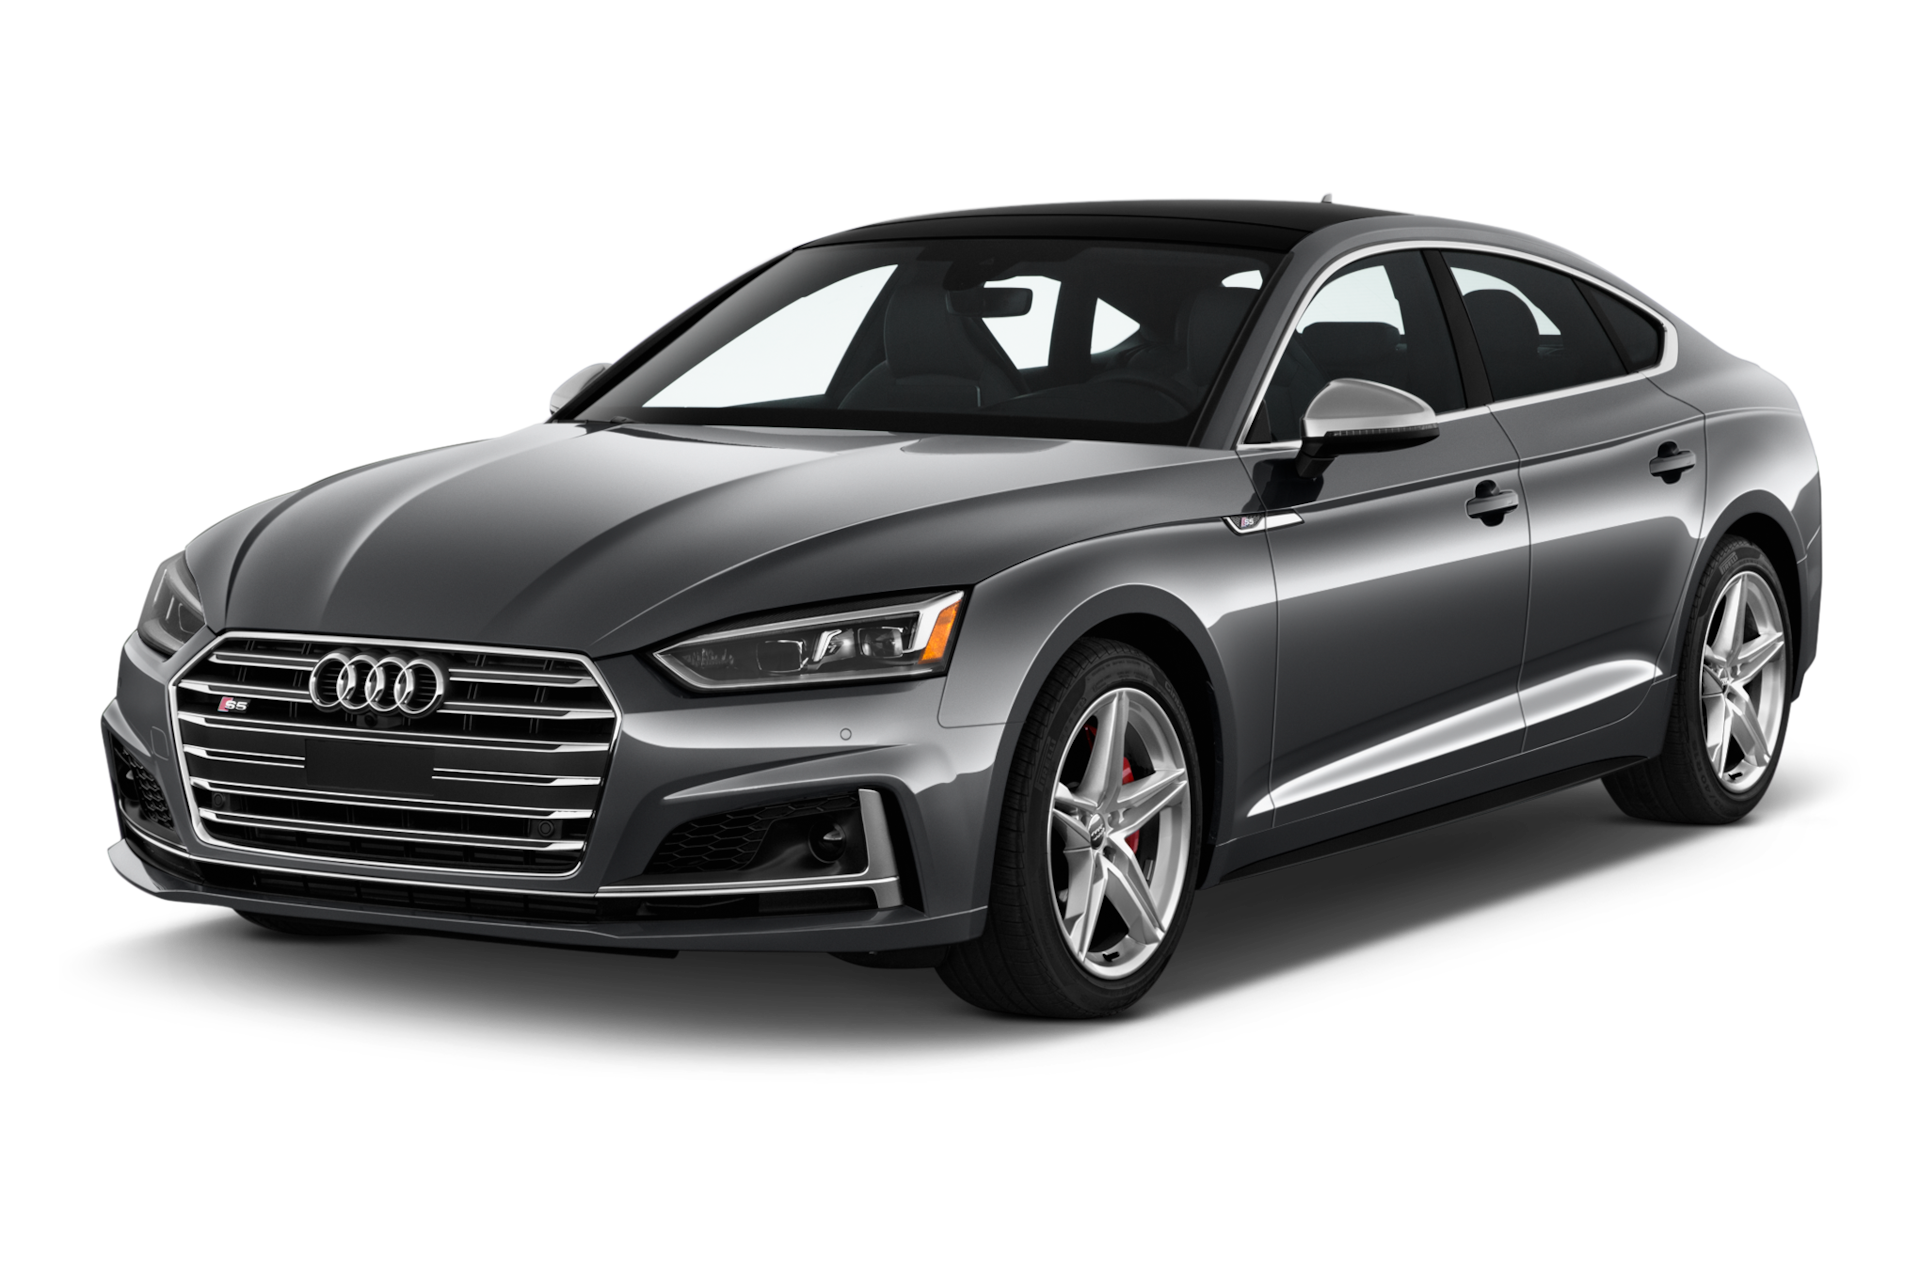 2019 Audi S5 Prices, Reviews, and Photos - MotorTrend